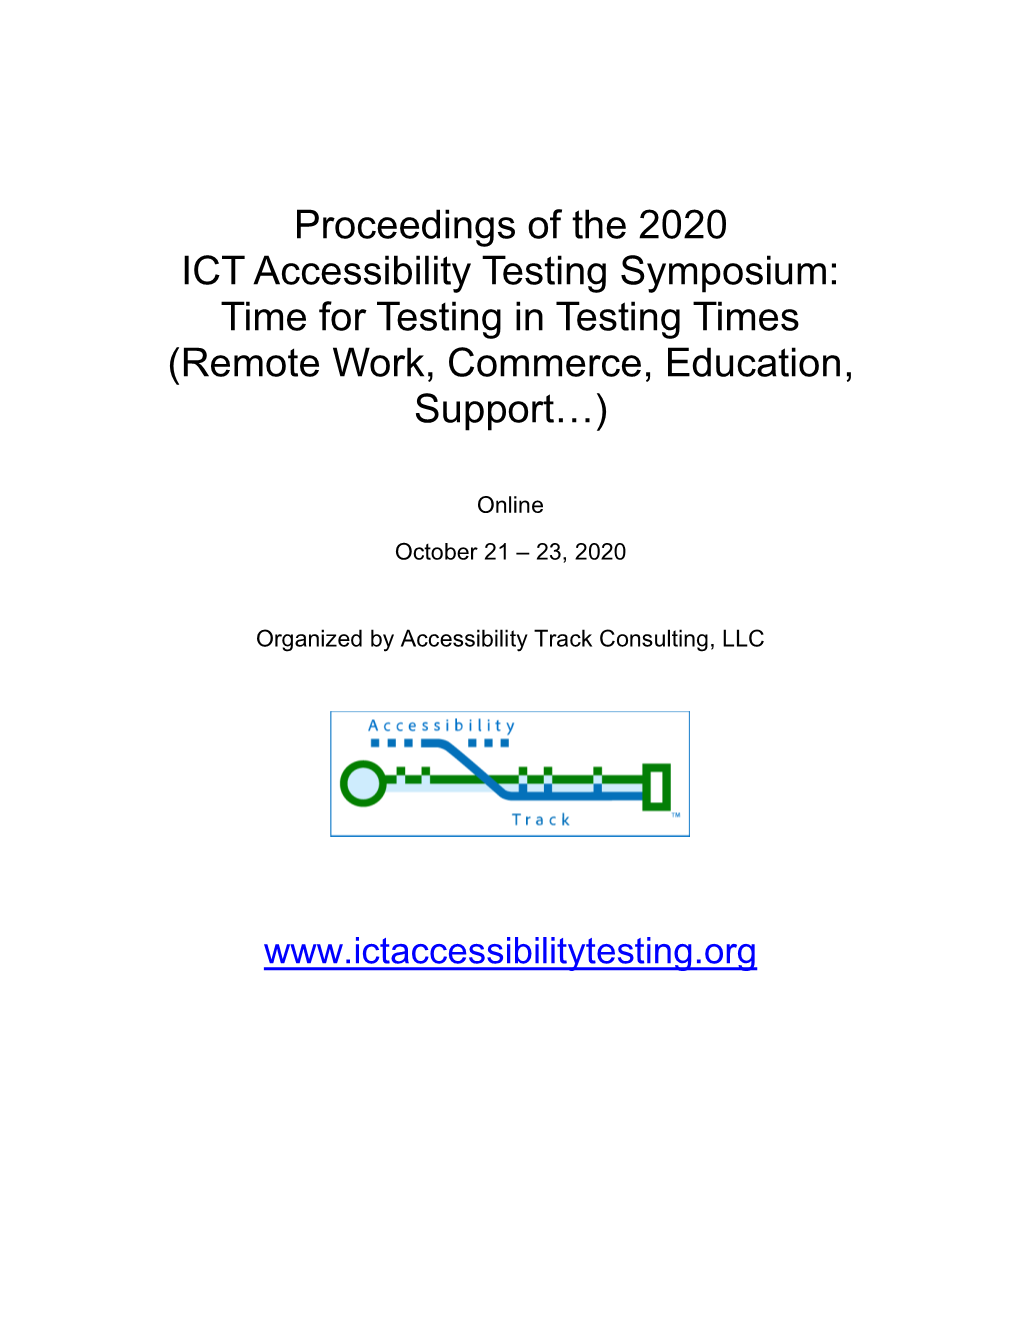 Proceedings of the 2020 ICT Accessibility Testing Symposium: Time for Testing in Testing Times (Remote Work, Commerce, Education, Support…)